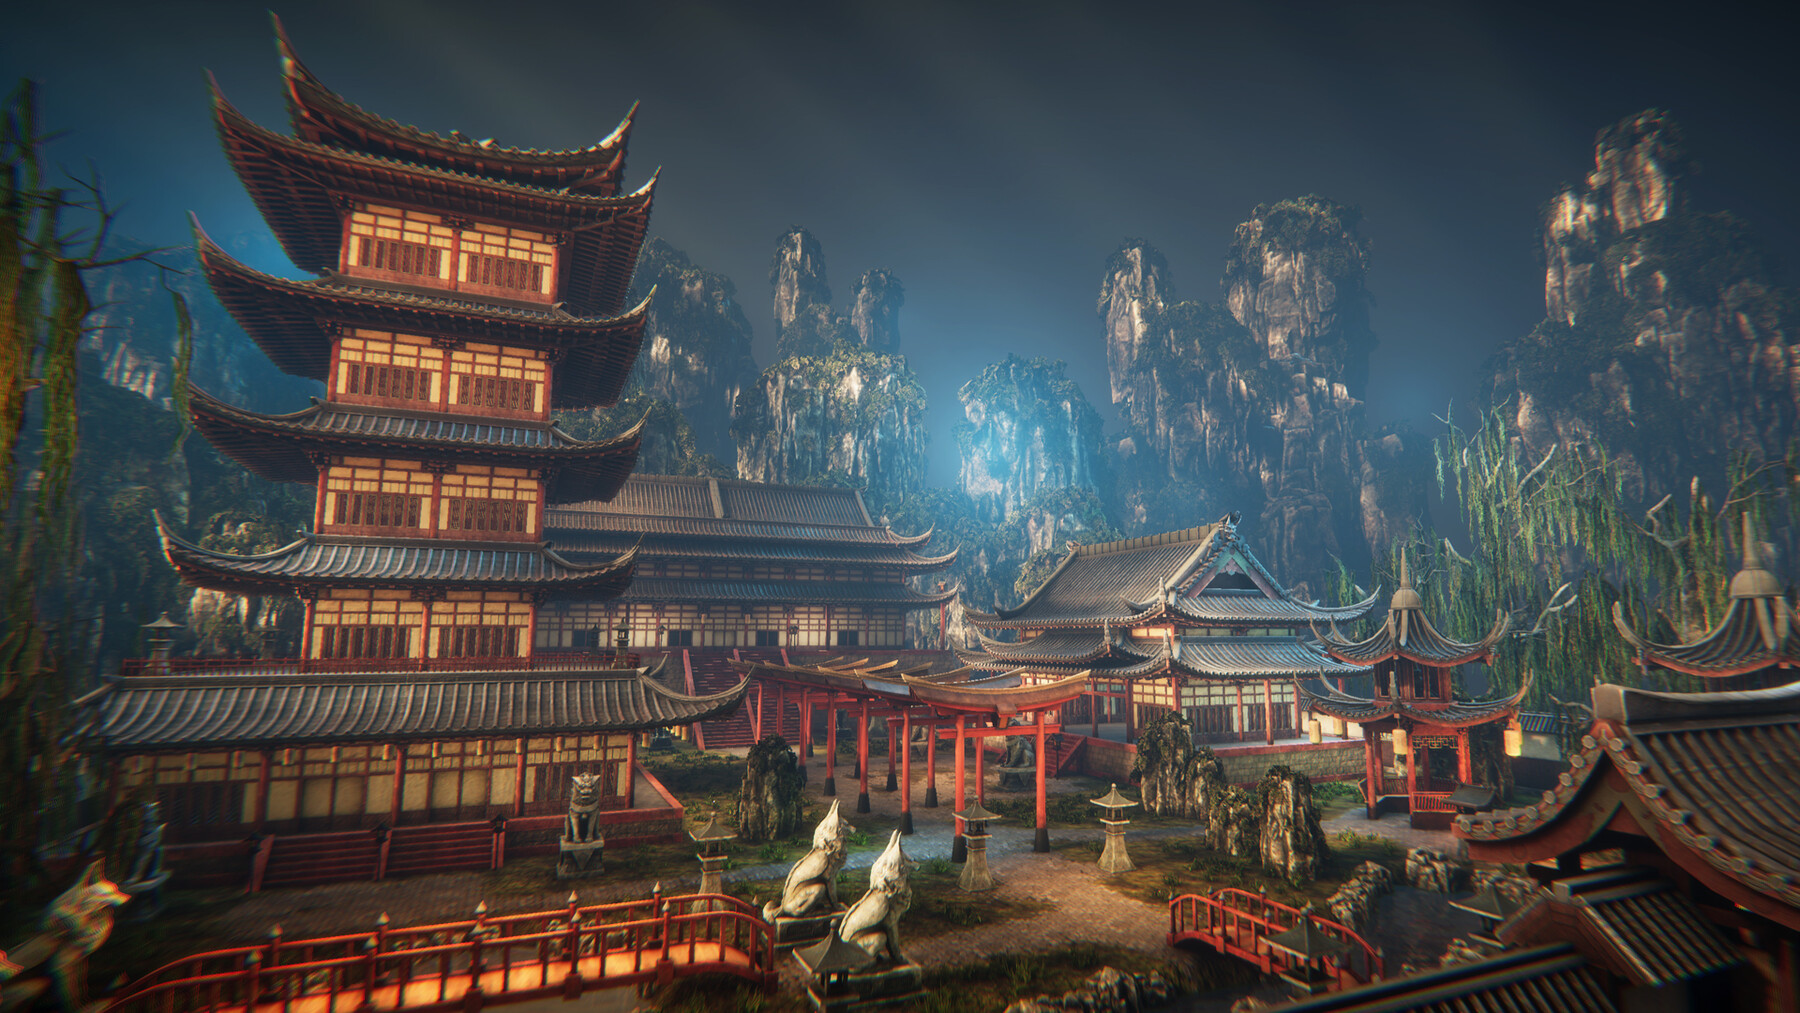 ArtStation - Asian architecture | Game Assets